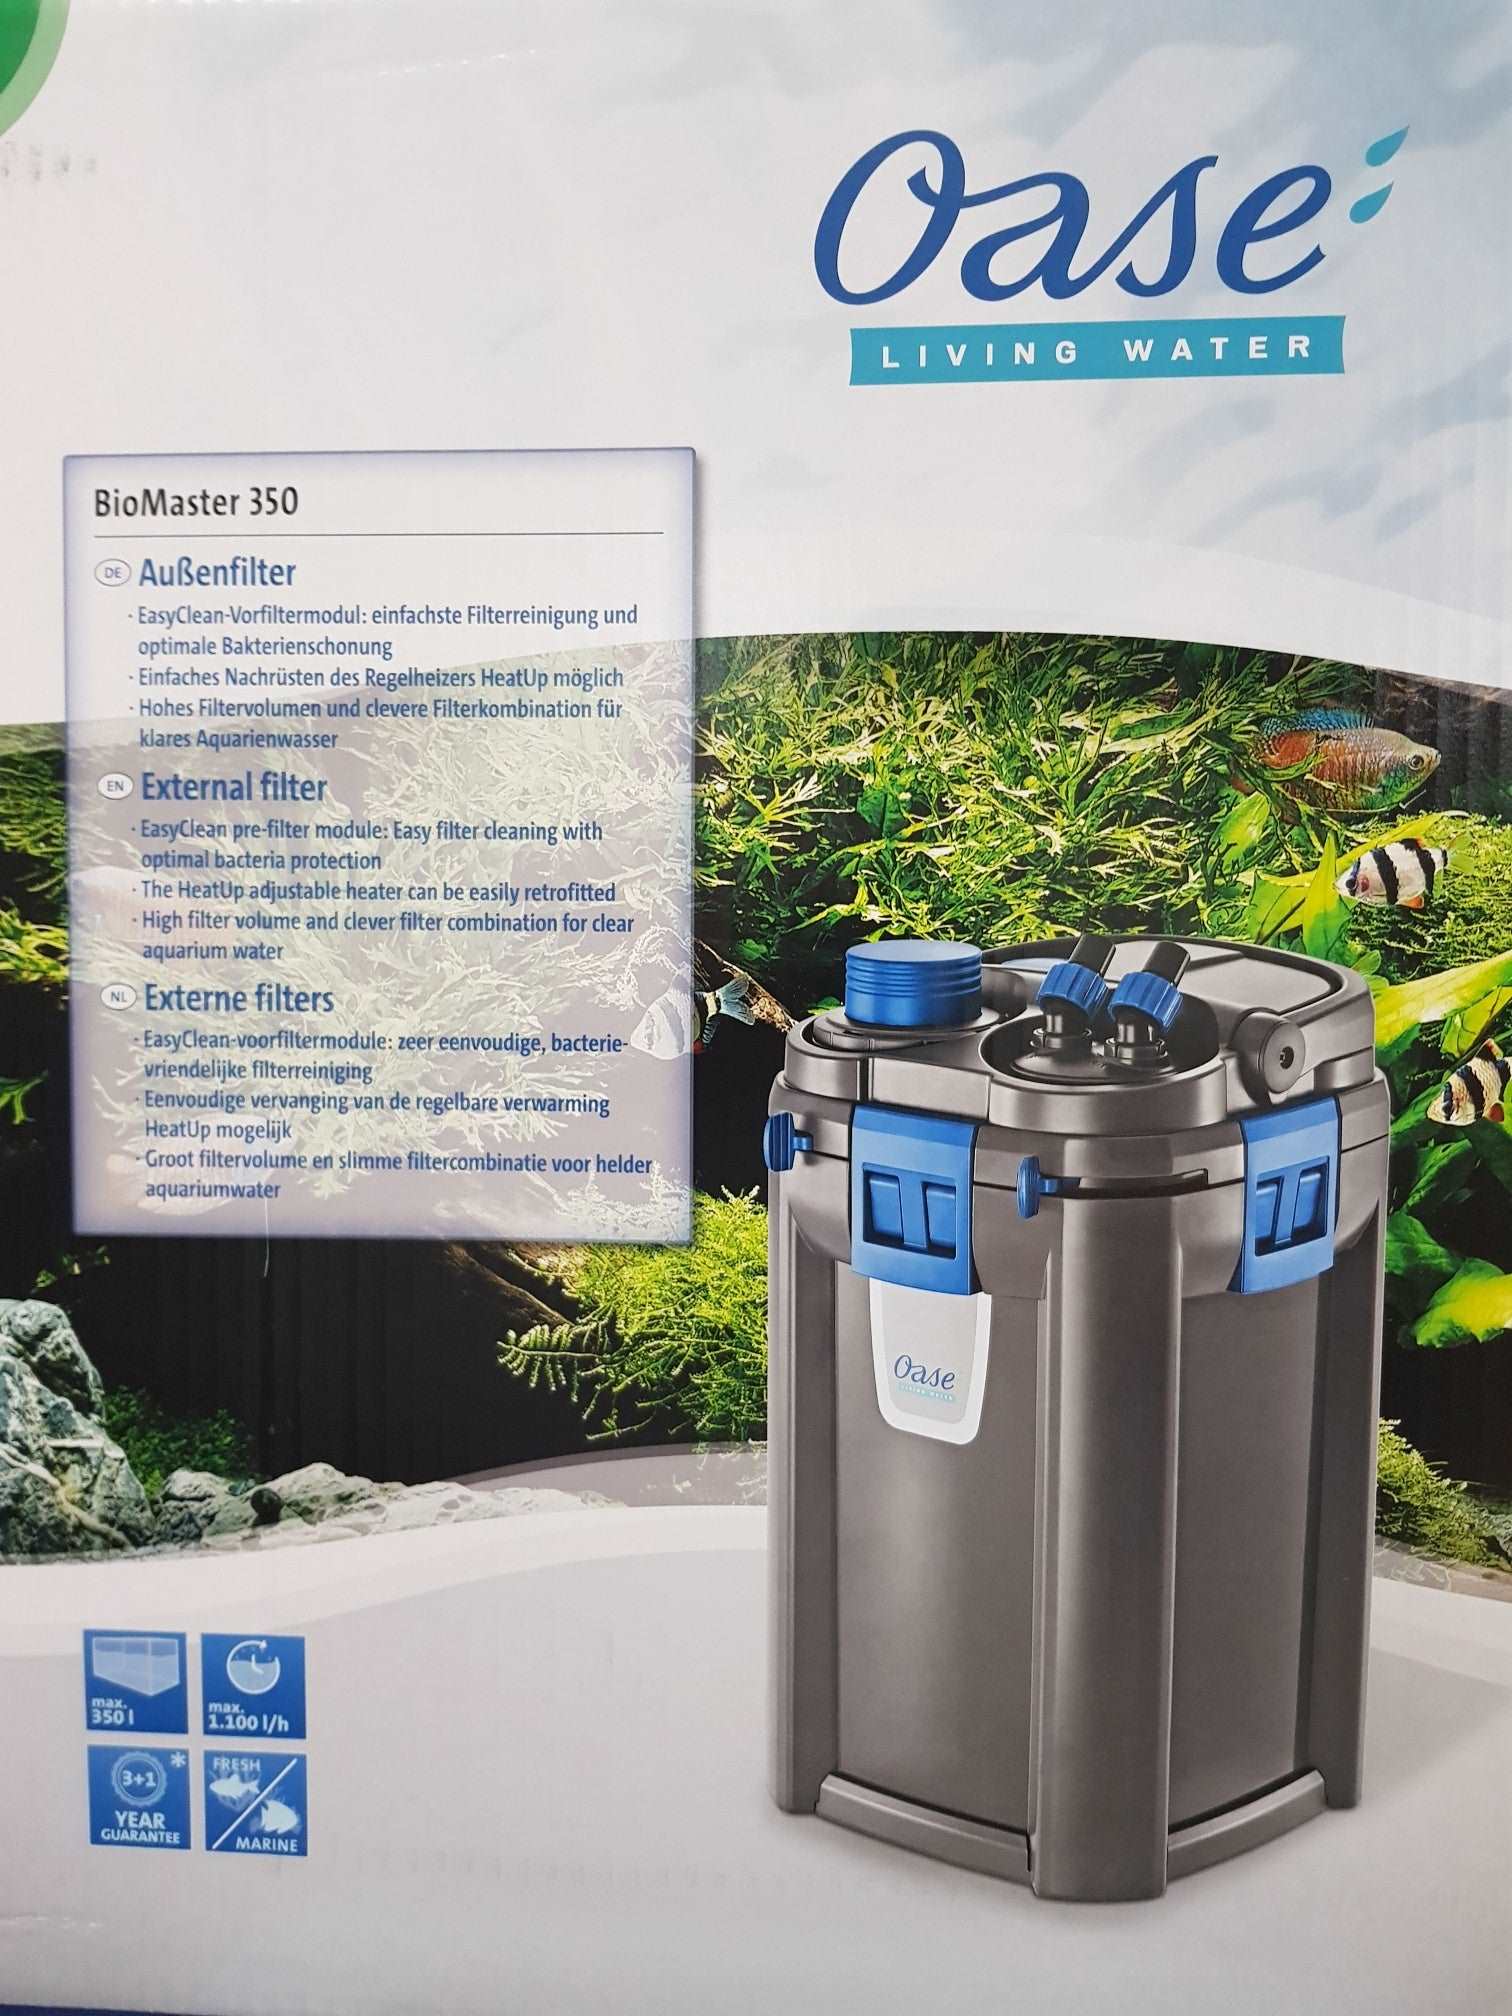 Oase Biomaster 350 canister filter